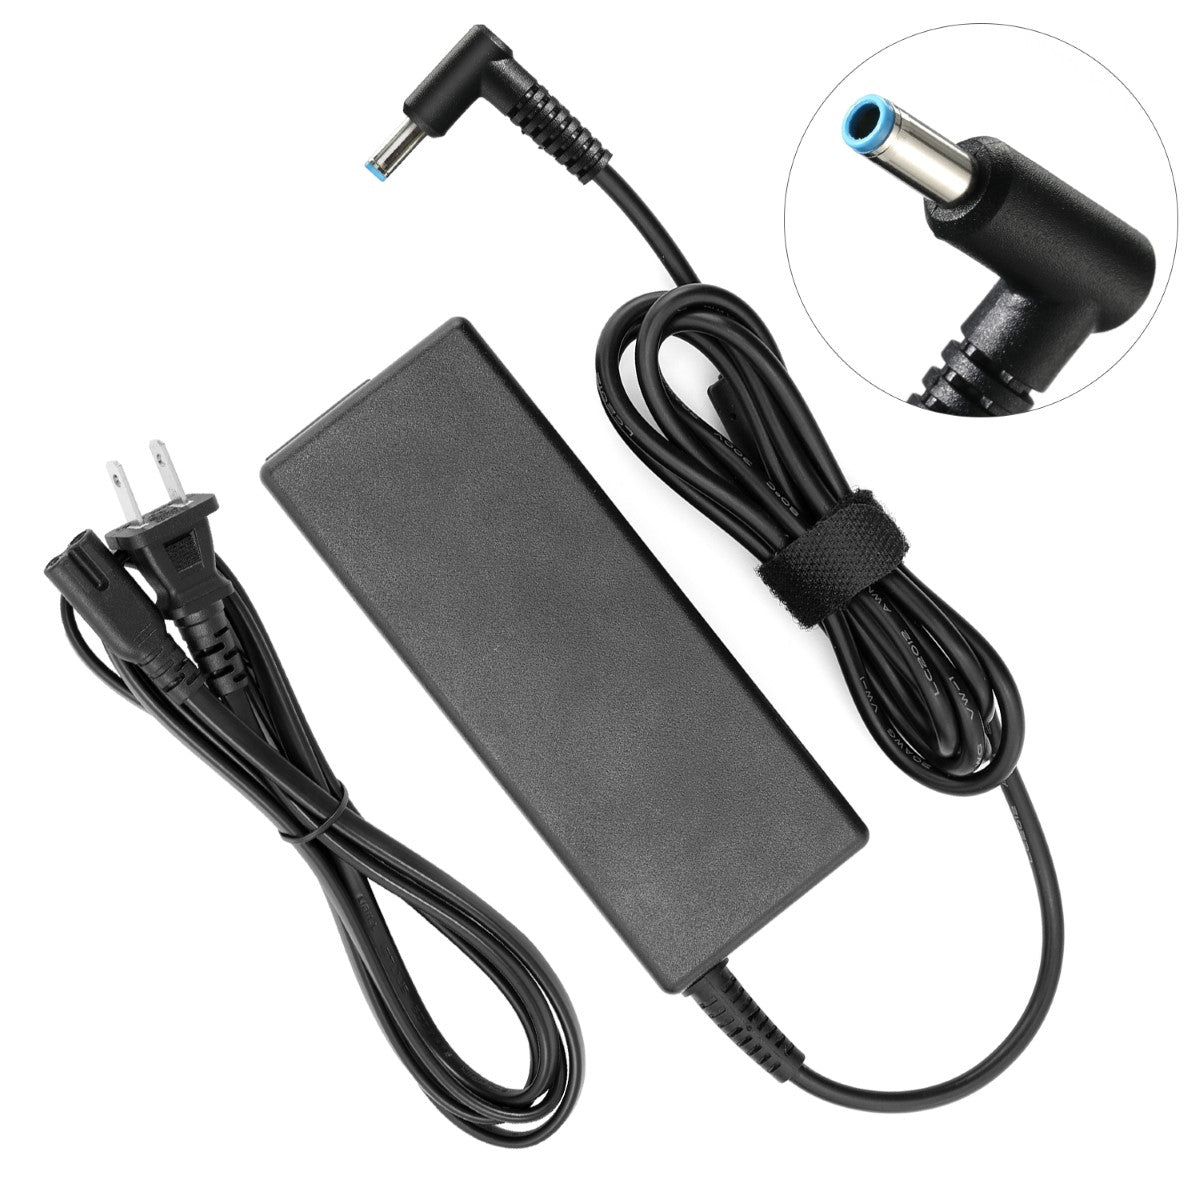 AC Adapter Charger for HP Envy Touchsmart 17-j037cl Notebook.